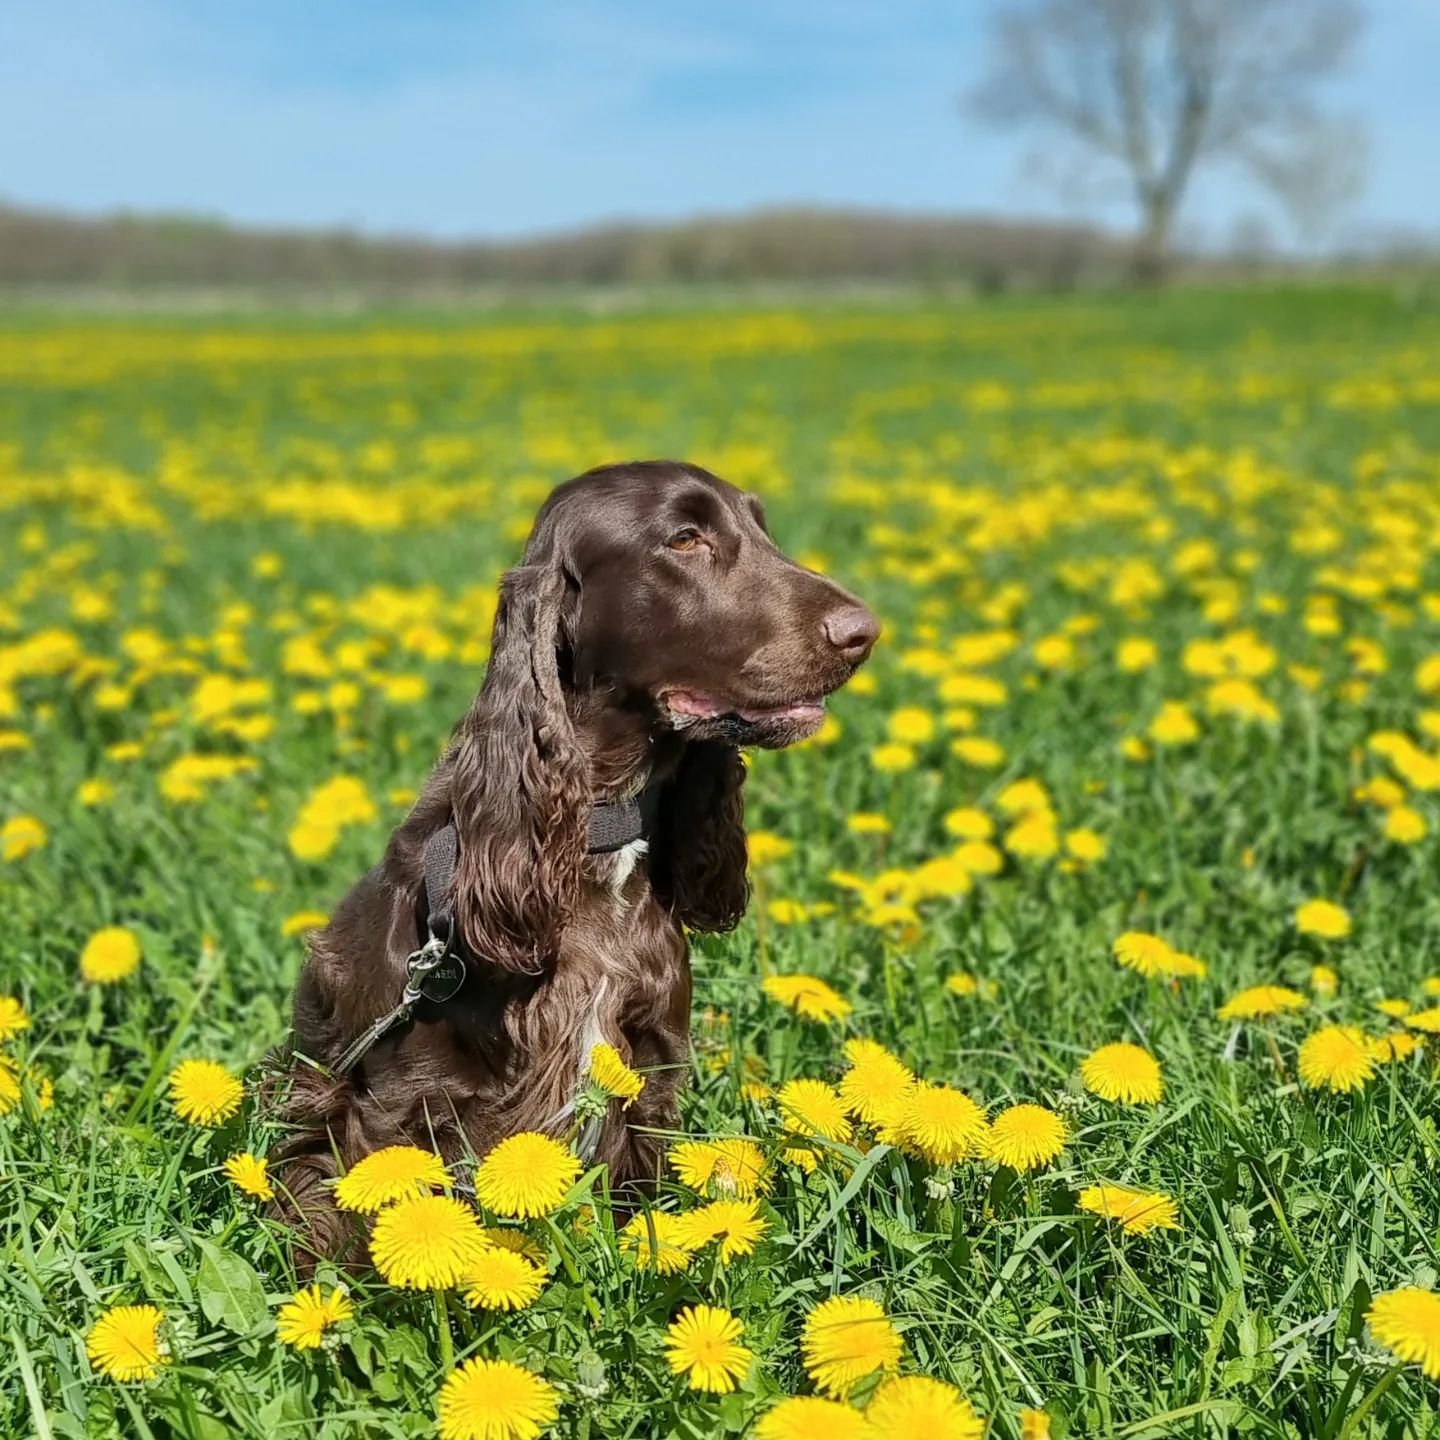 We are expecting Field Spaniel puppies!!! 

Hasaty's Happy Go-Lucky Me
X
TKN(US) SISSCG Falstrias Make A Memory

We expect a big litter of puppies early June. In this combi ation we expect liver and liver with tan markings puppies. 

Both parents hav